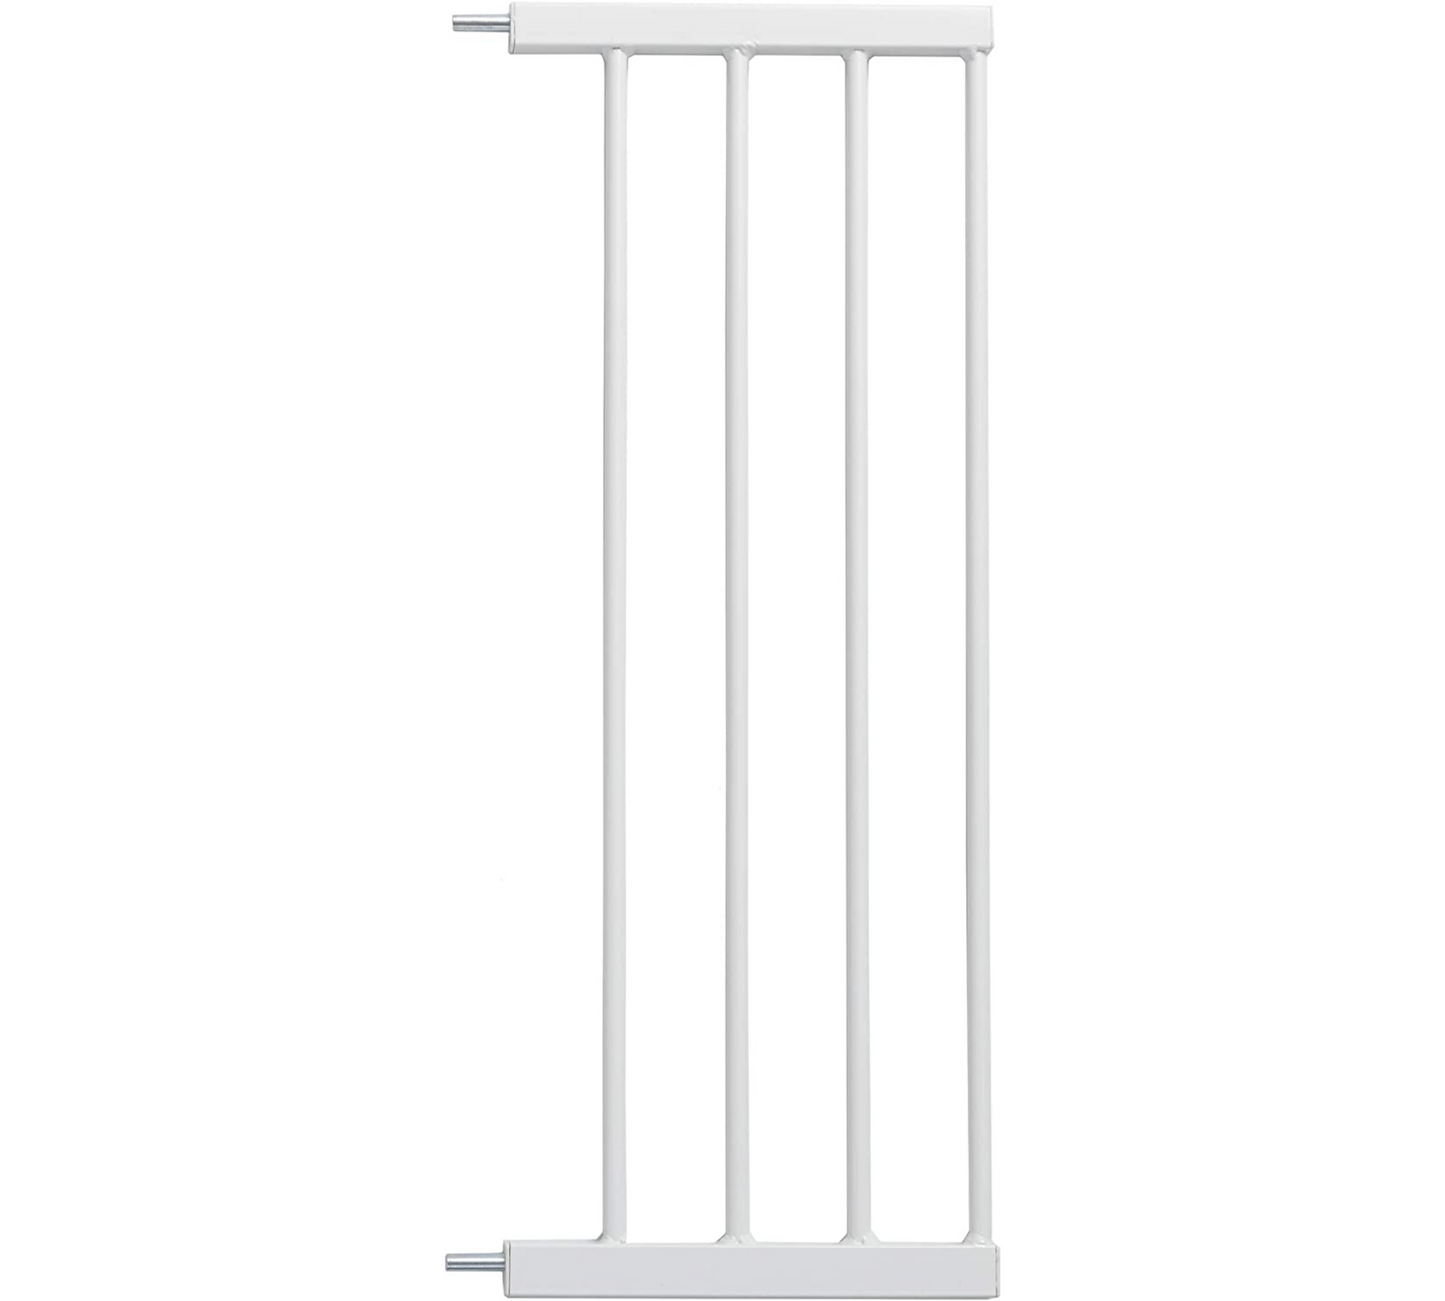 MidWest Glow in the Dark Steel Gate Extension for 29" Tall Gate